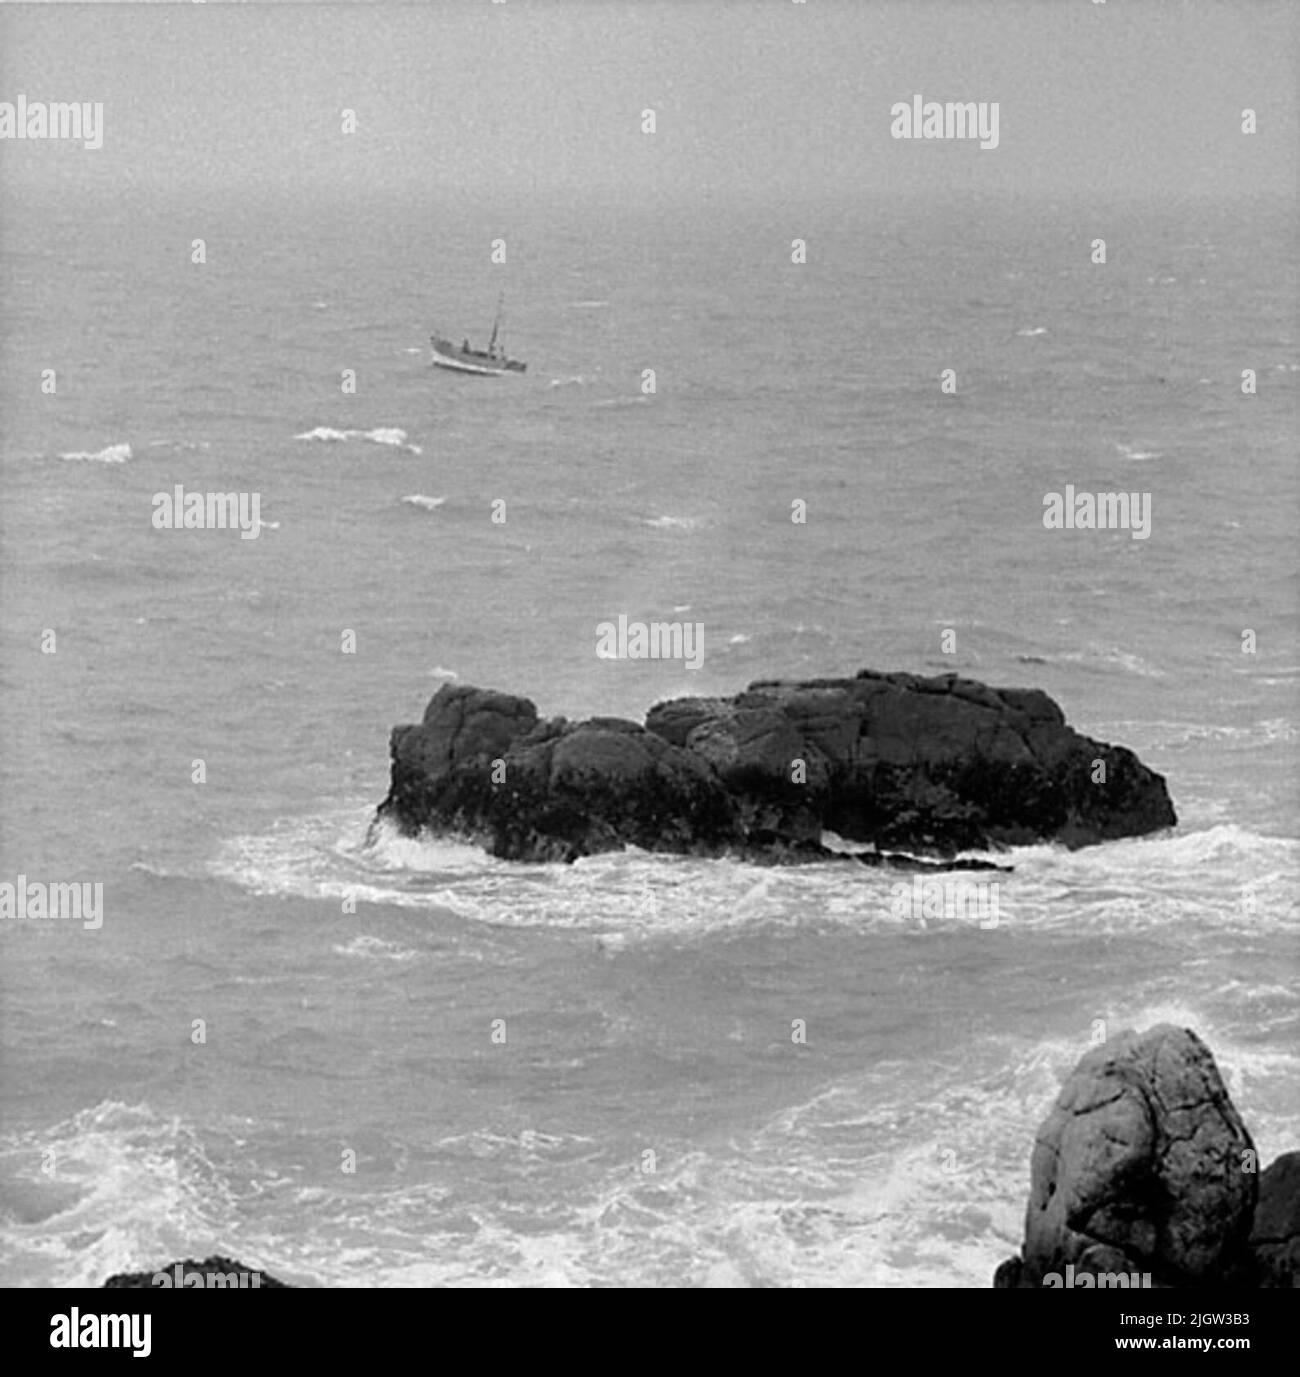 8. France. Photo journal is available at B.M.A. + Photo albums. Acquisition: Books and archive materials. Photos taken between 1959-10-16 and 1959-10-1712 Pictures in series. According to notes: France. Atlantic coast, Le Croisic, 17/10 -59. Beach fishermen in hard weather. A boat on the open sea, it is severe weather. In the foreground is a rocky beach that the waves oppose. Stock Photo